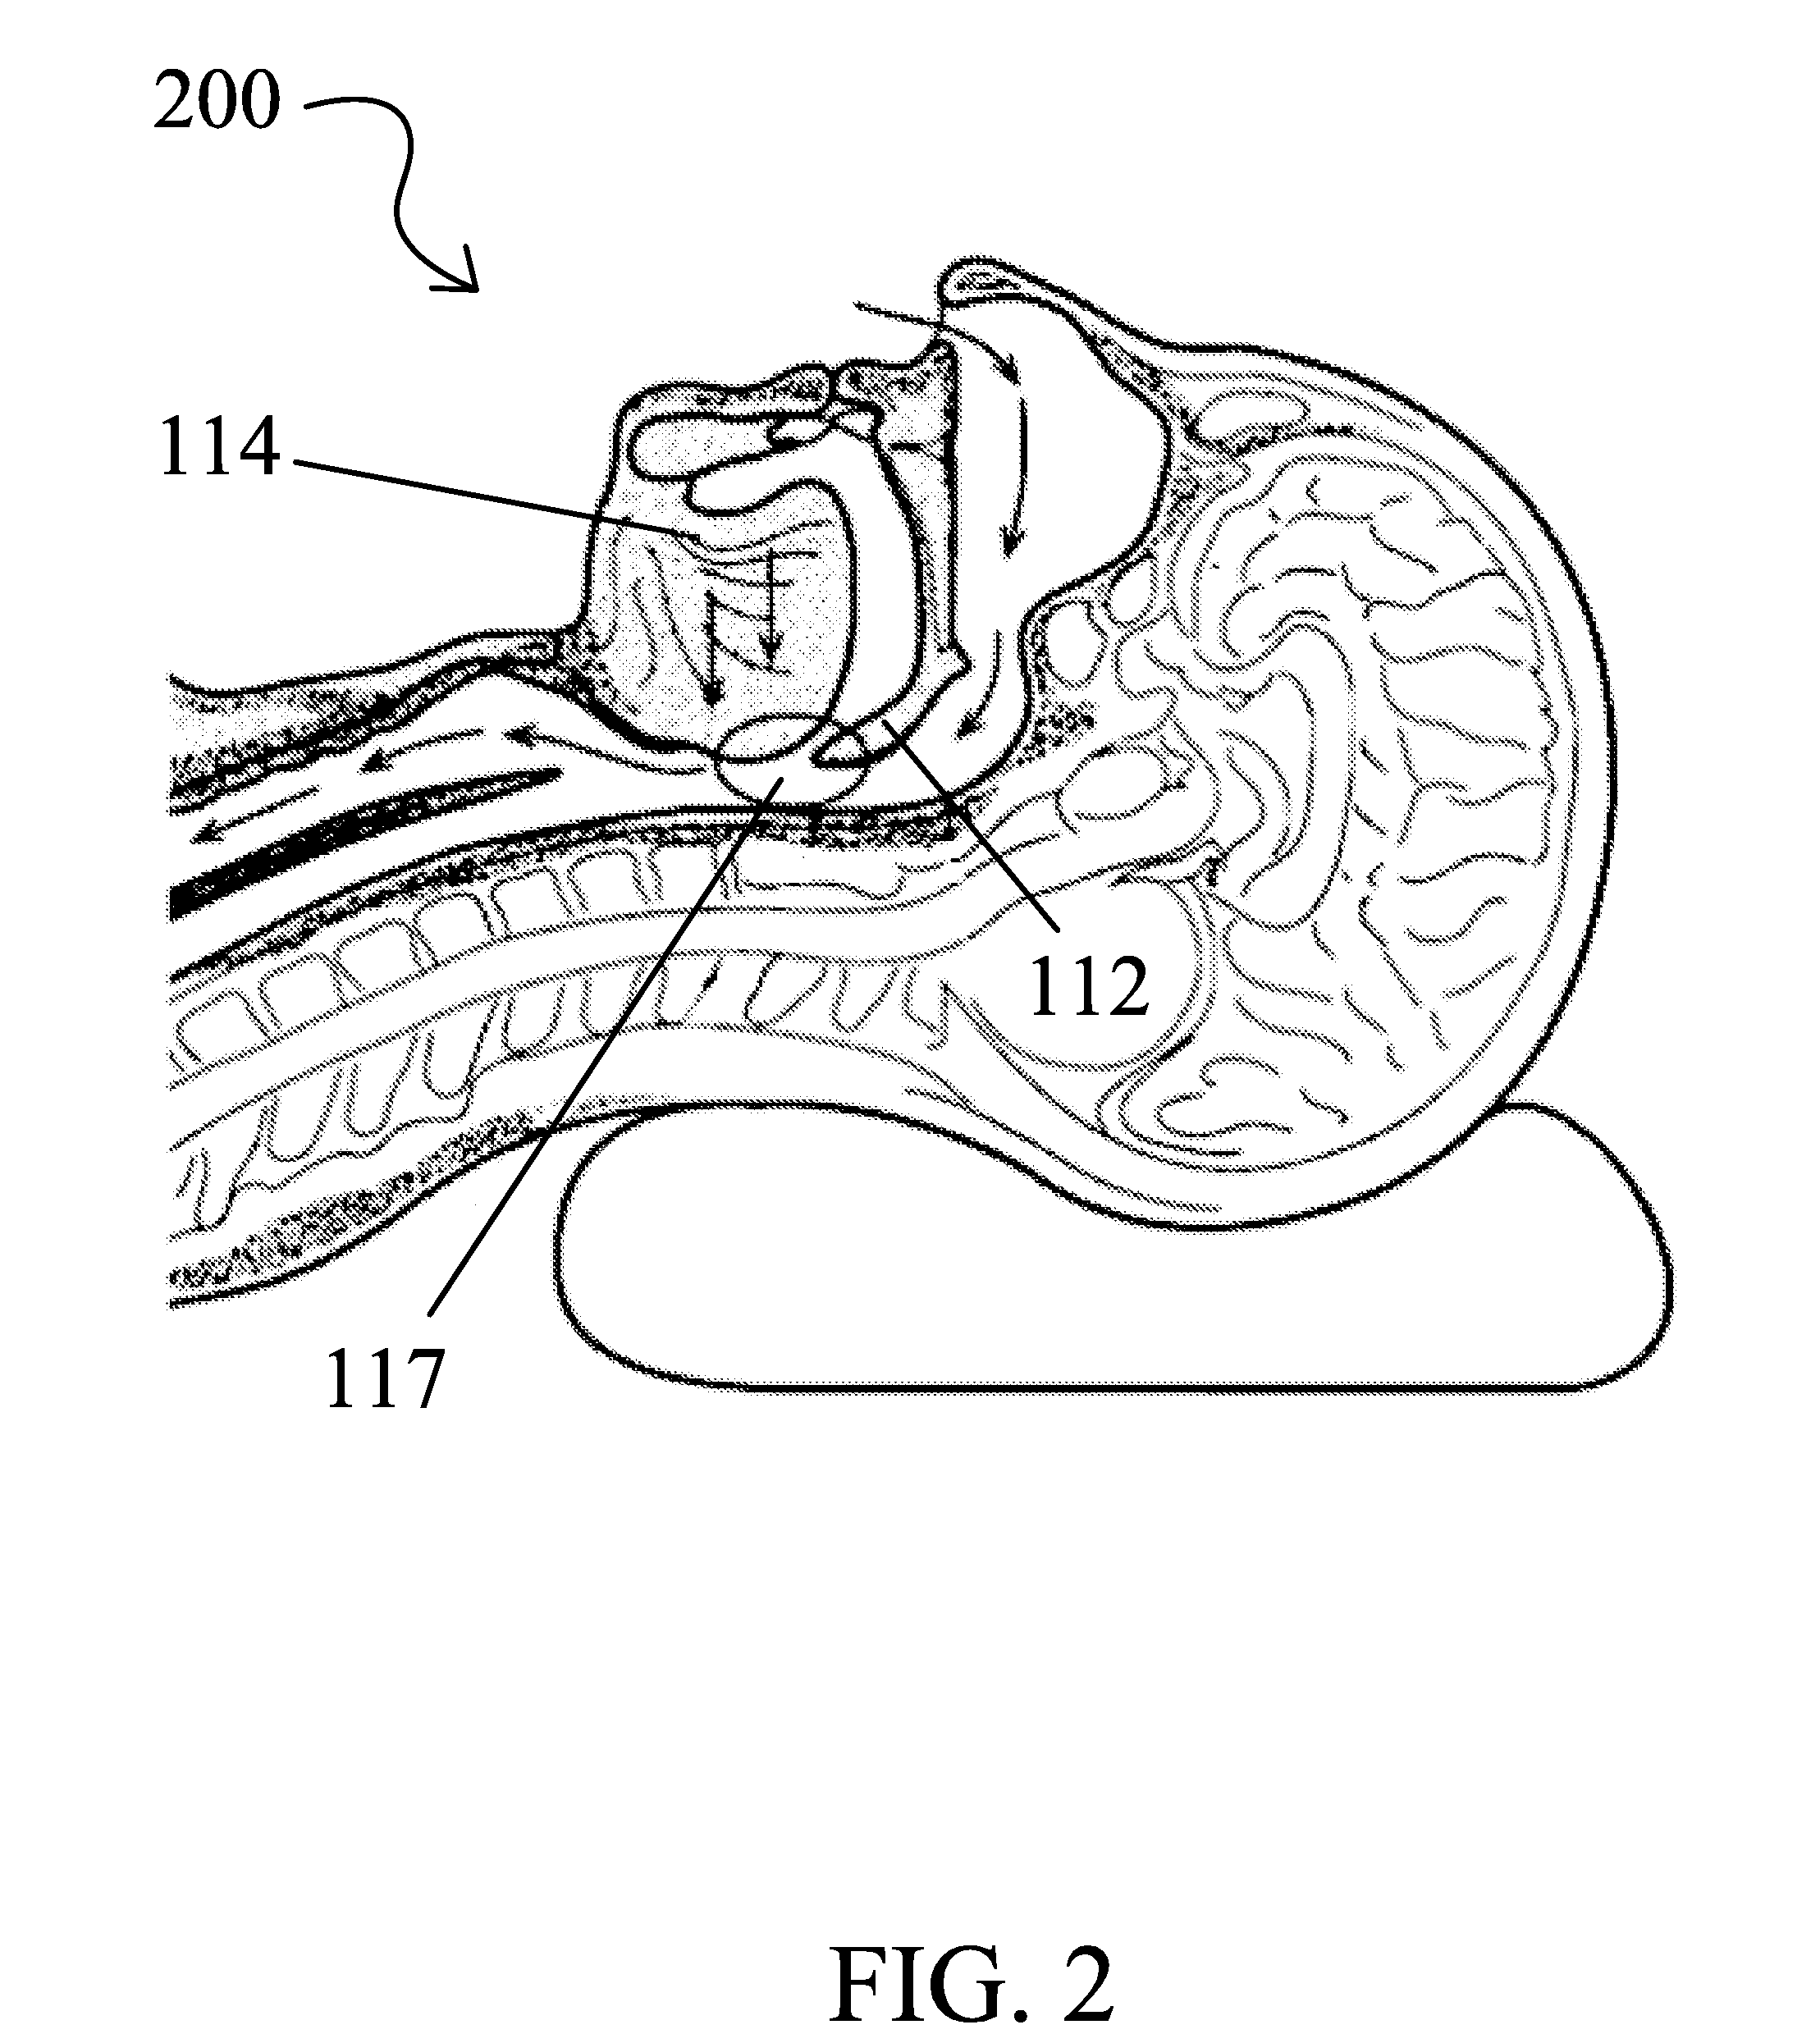 Snoring and obstructive sleep apnea prevention and treatment device